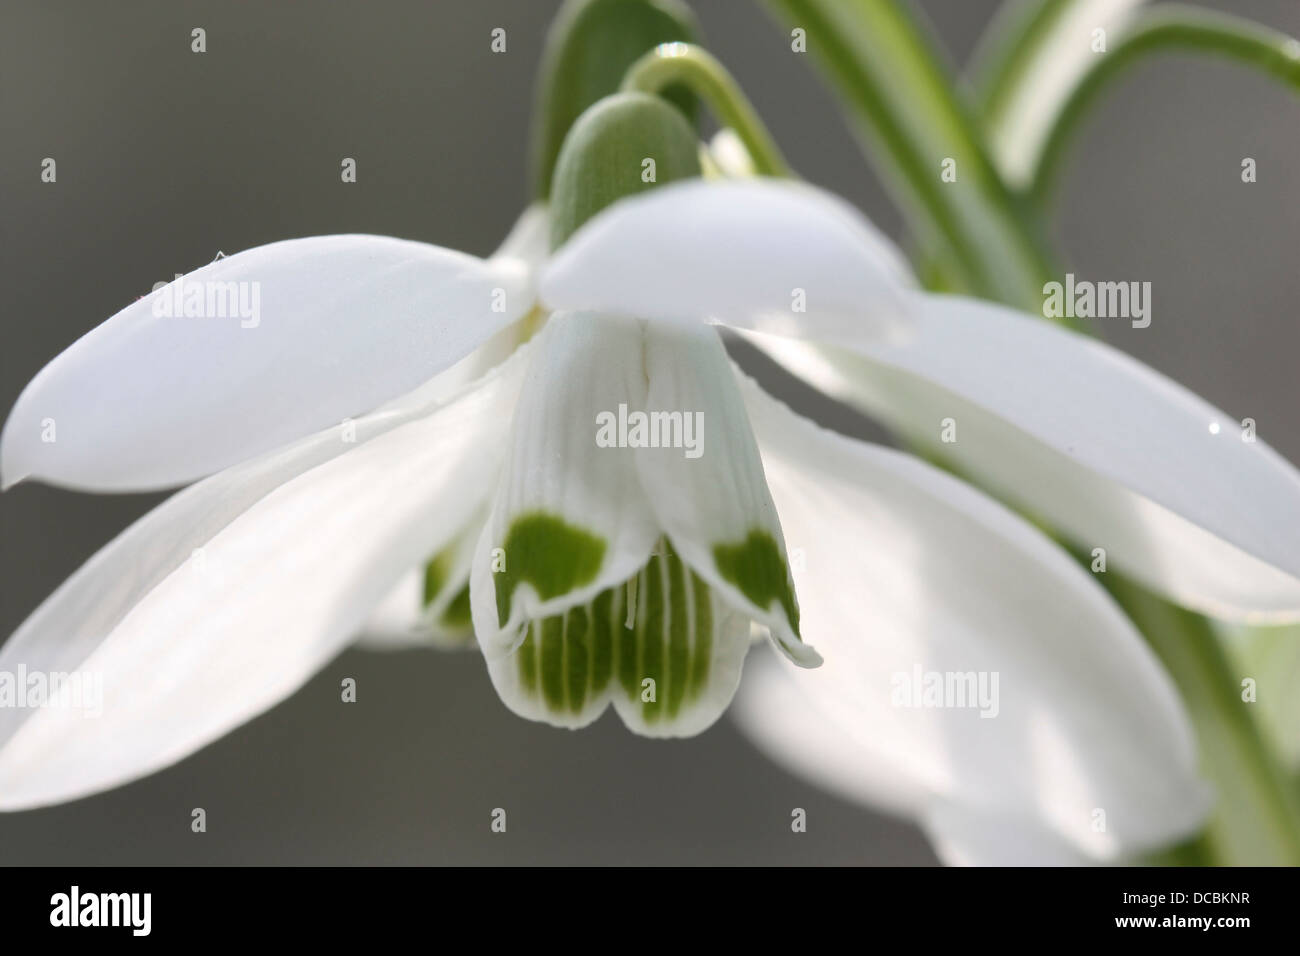 A close up picture of a snow drop showing the delicate petals showing the green and white colouring Stock Photo